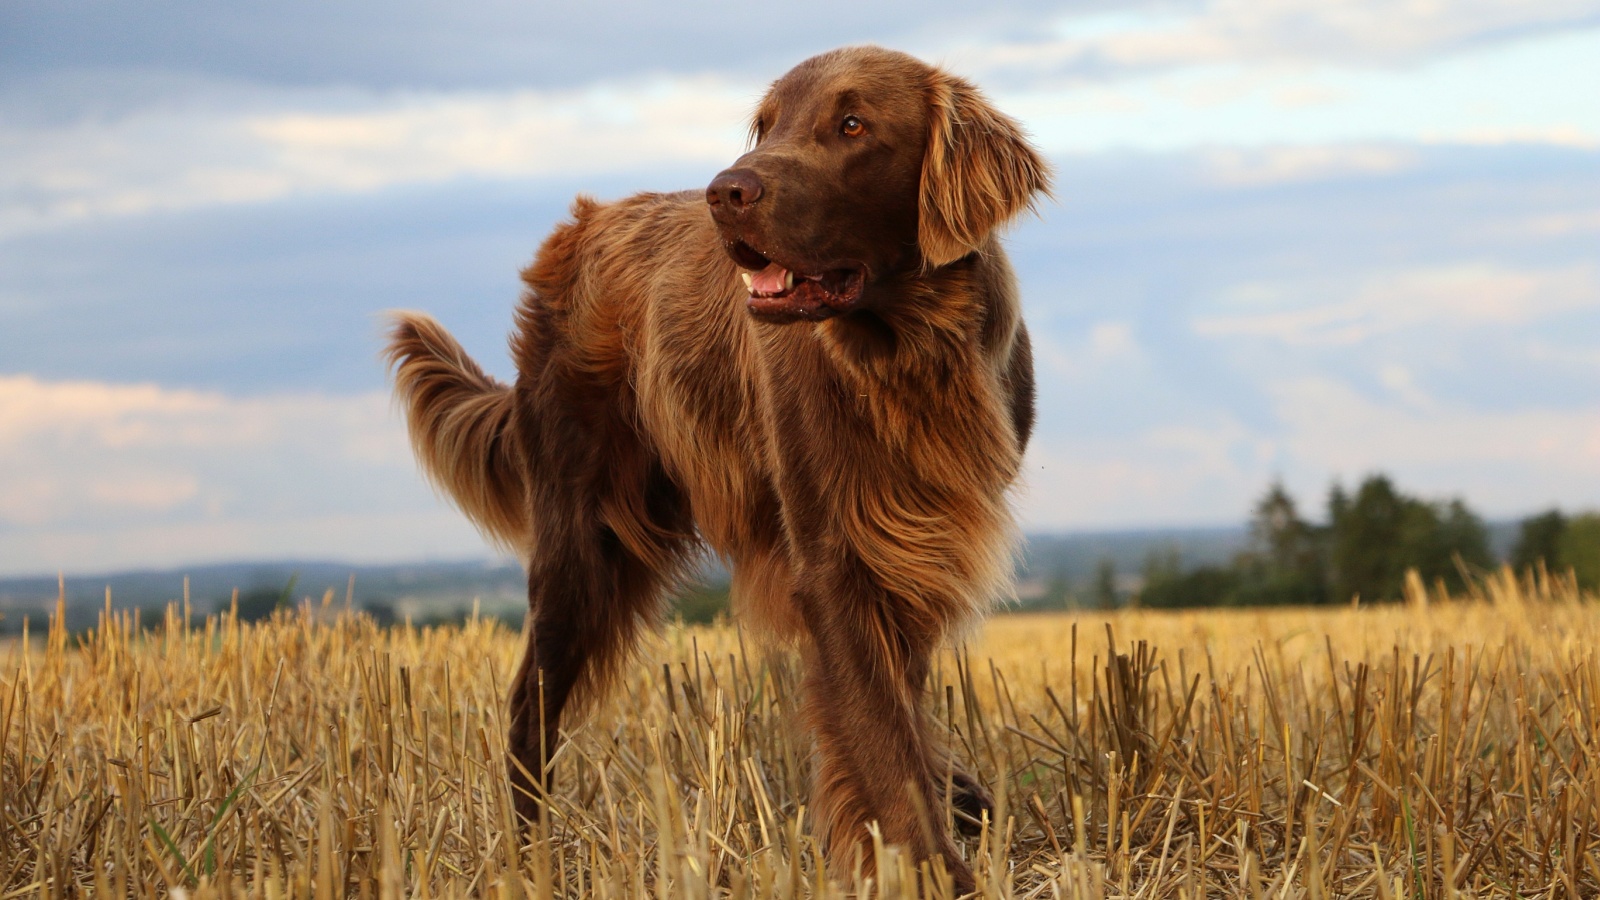 image credit: Bianca Grueneberg/Shutterstock <p>Flat-Coated Retrievers are known for their cheerful and optimistic demeanor. They are quick to learn and always eager to please, making training a rewarding experience. These dogs are playful well into adulthood and need regular exercise.</p>